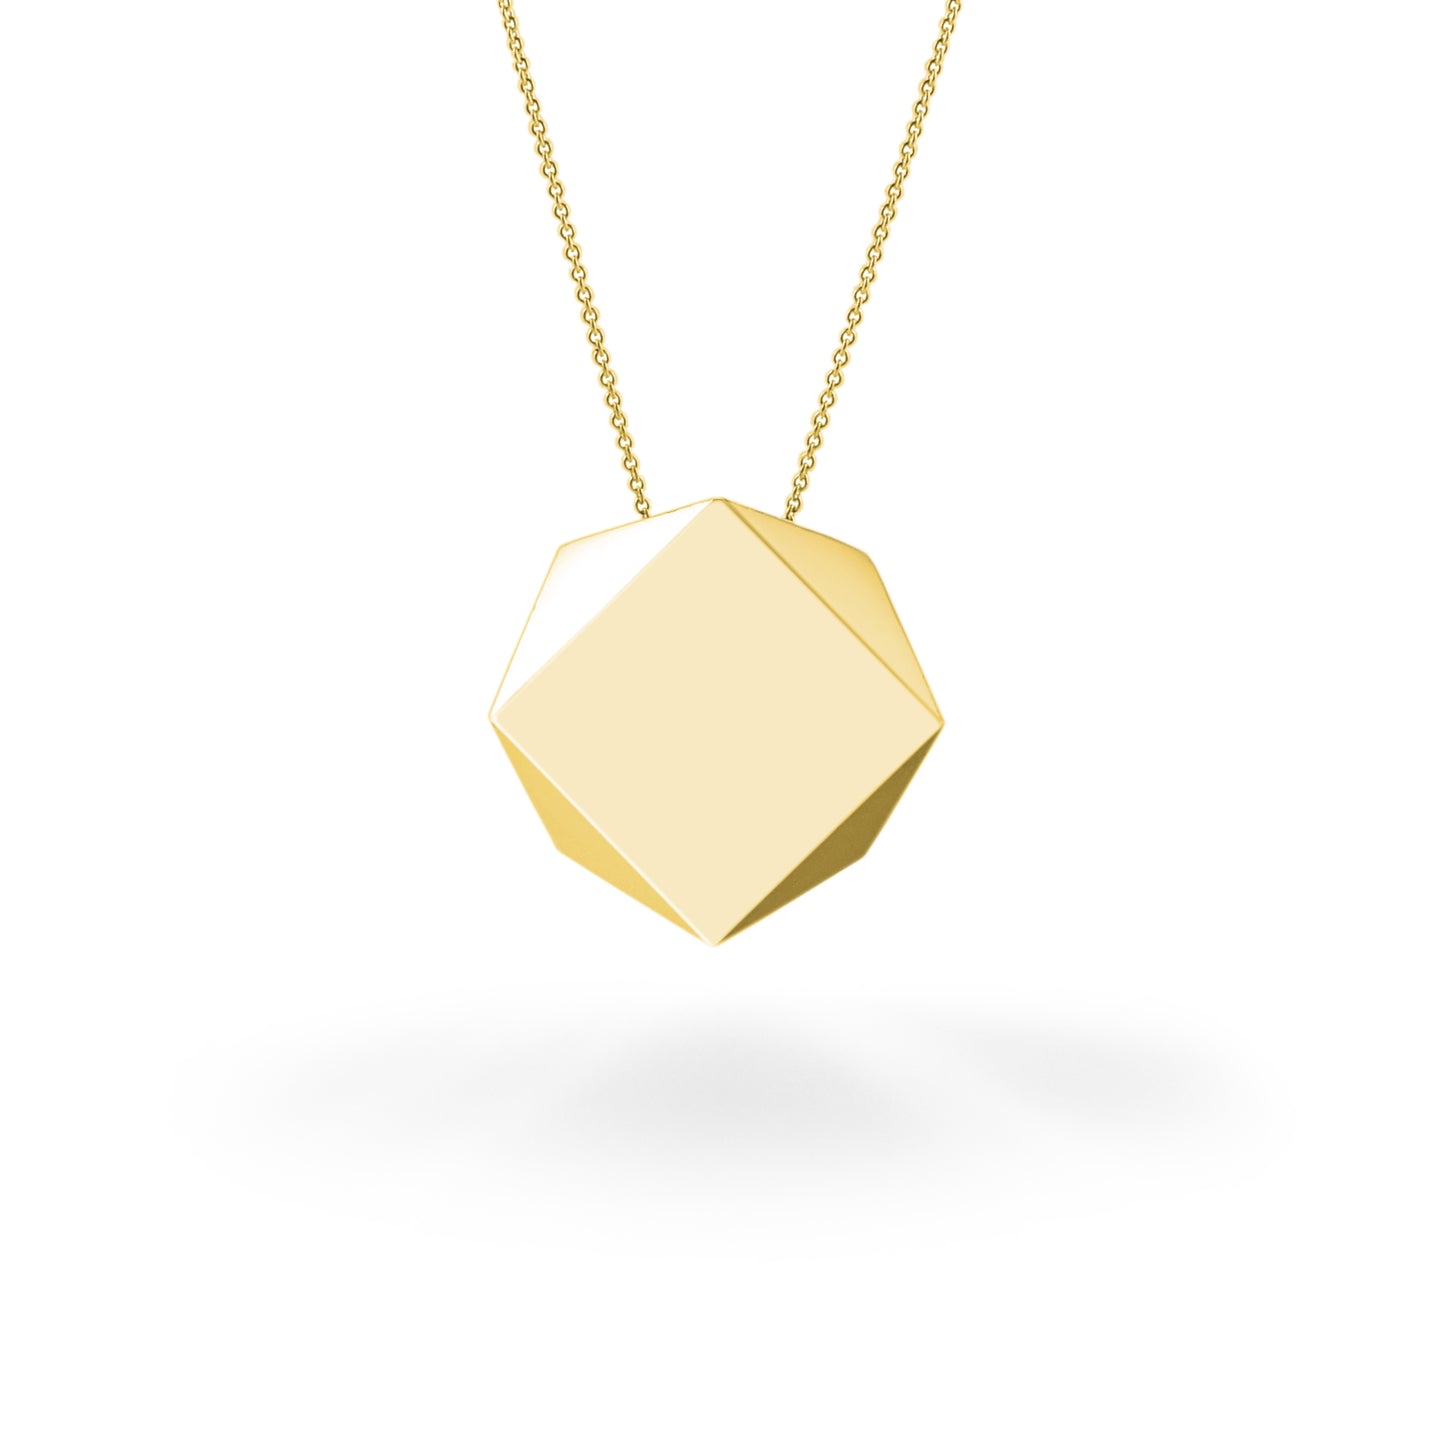 Geometry necklace